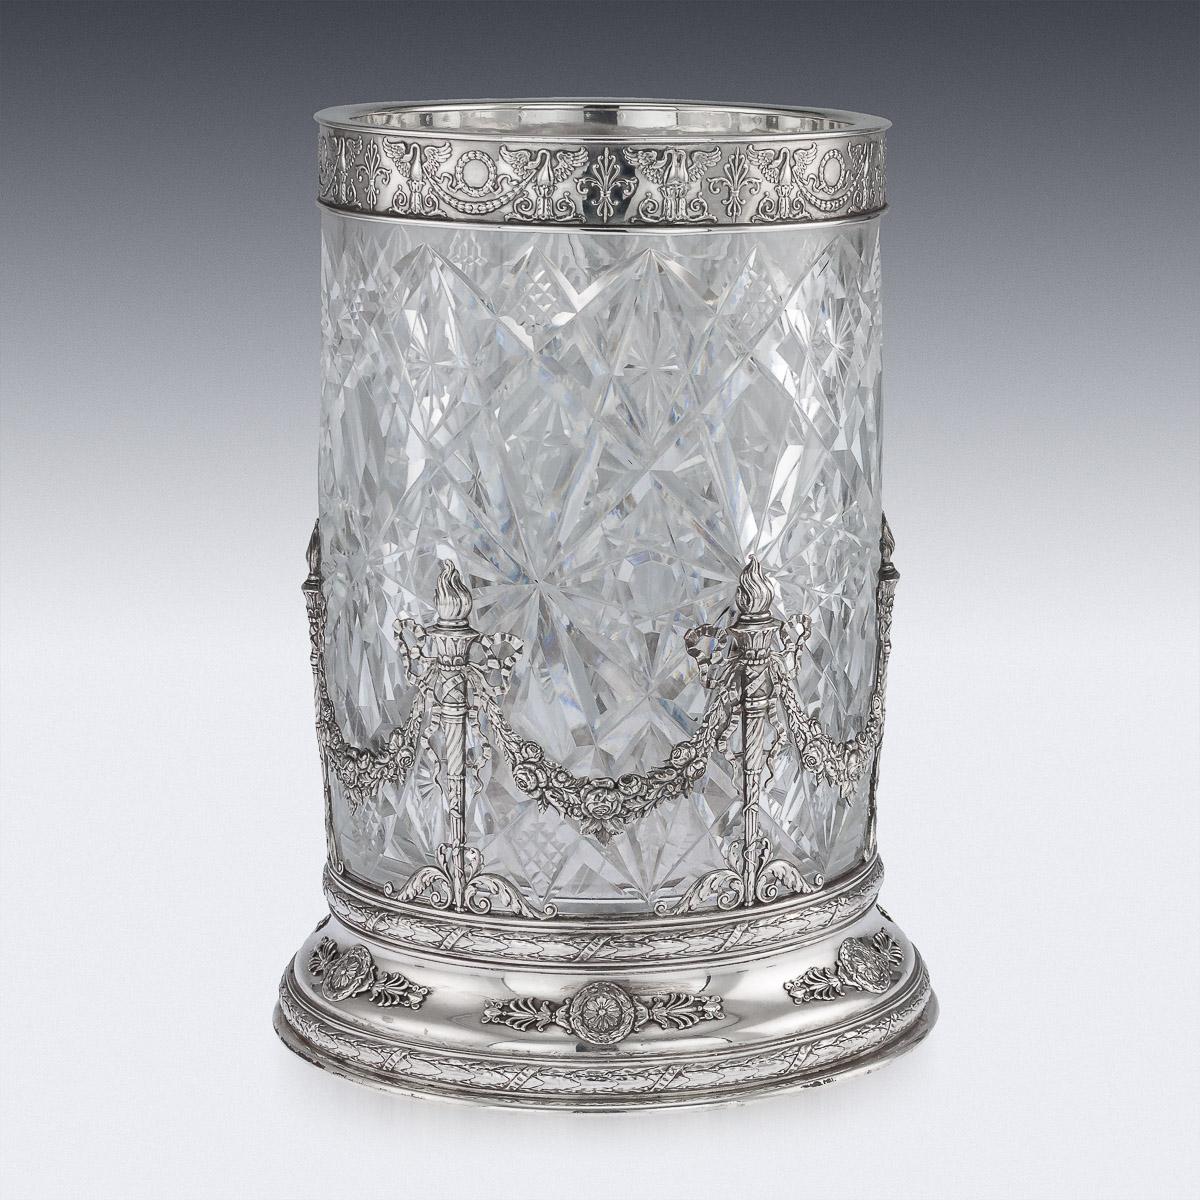 Antique early 20th century Russian Empire style monumental solid silver & cut glass vase, of straight cylindrical form, the glass cut with star facets and ellipses, the base mount applied with intertwining ribbon tied laurel leaf branches, laurel